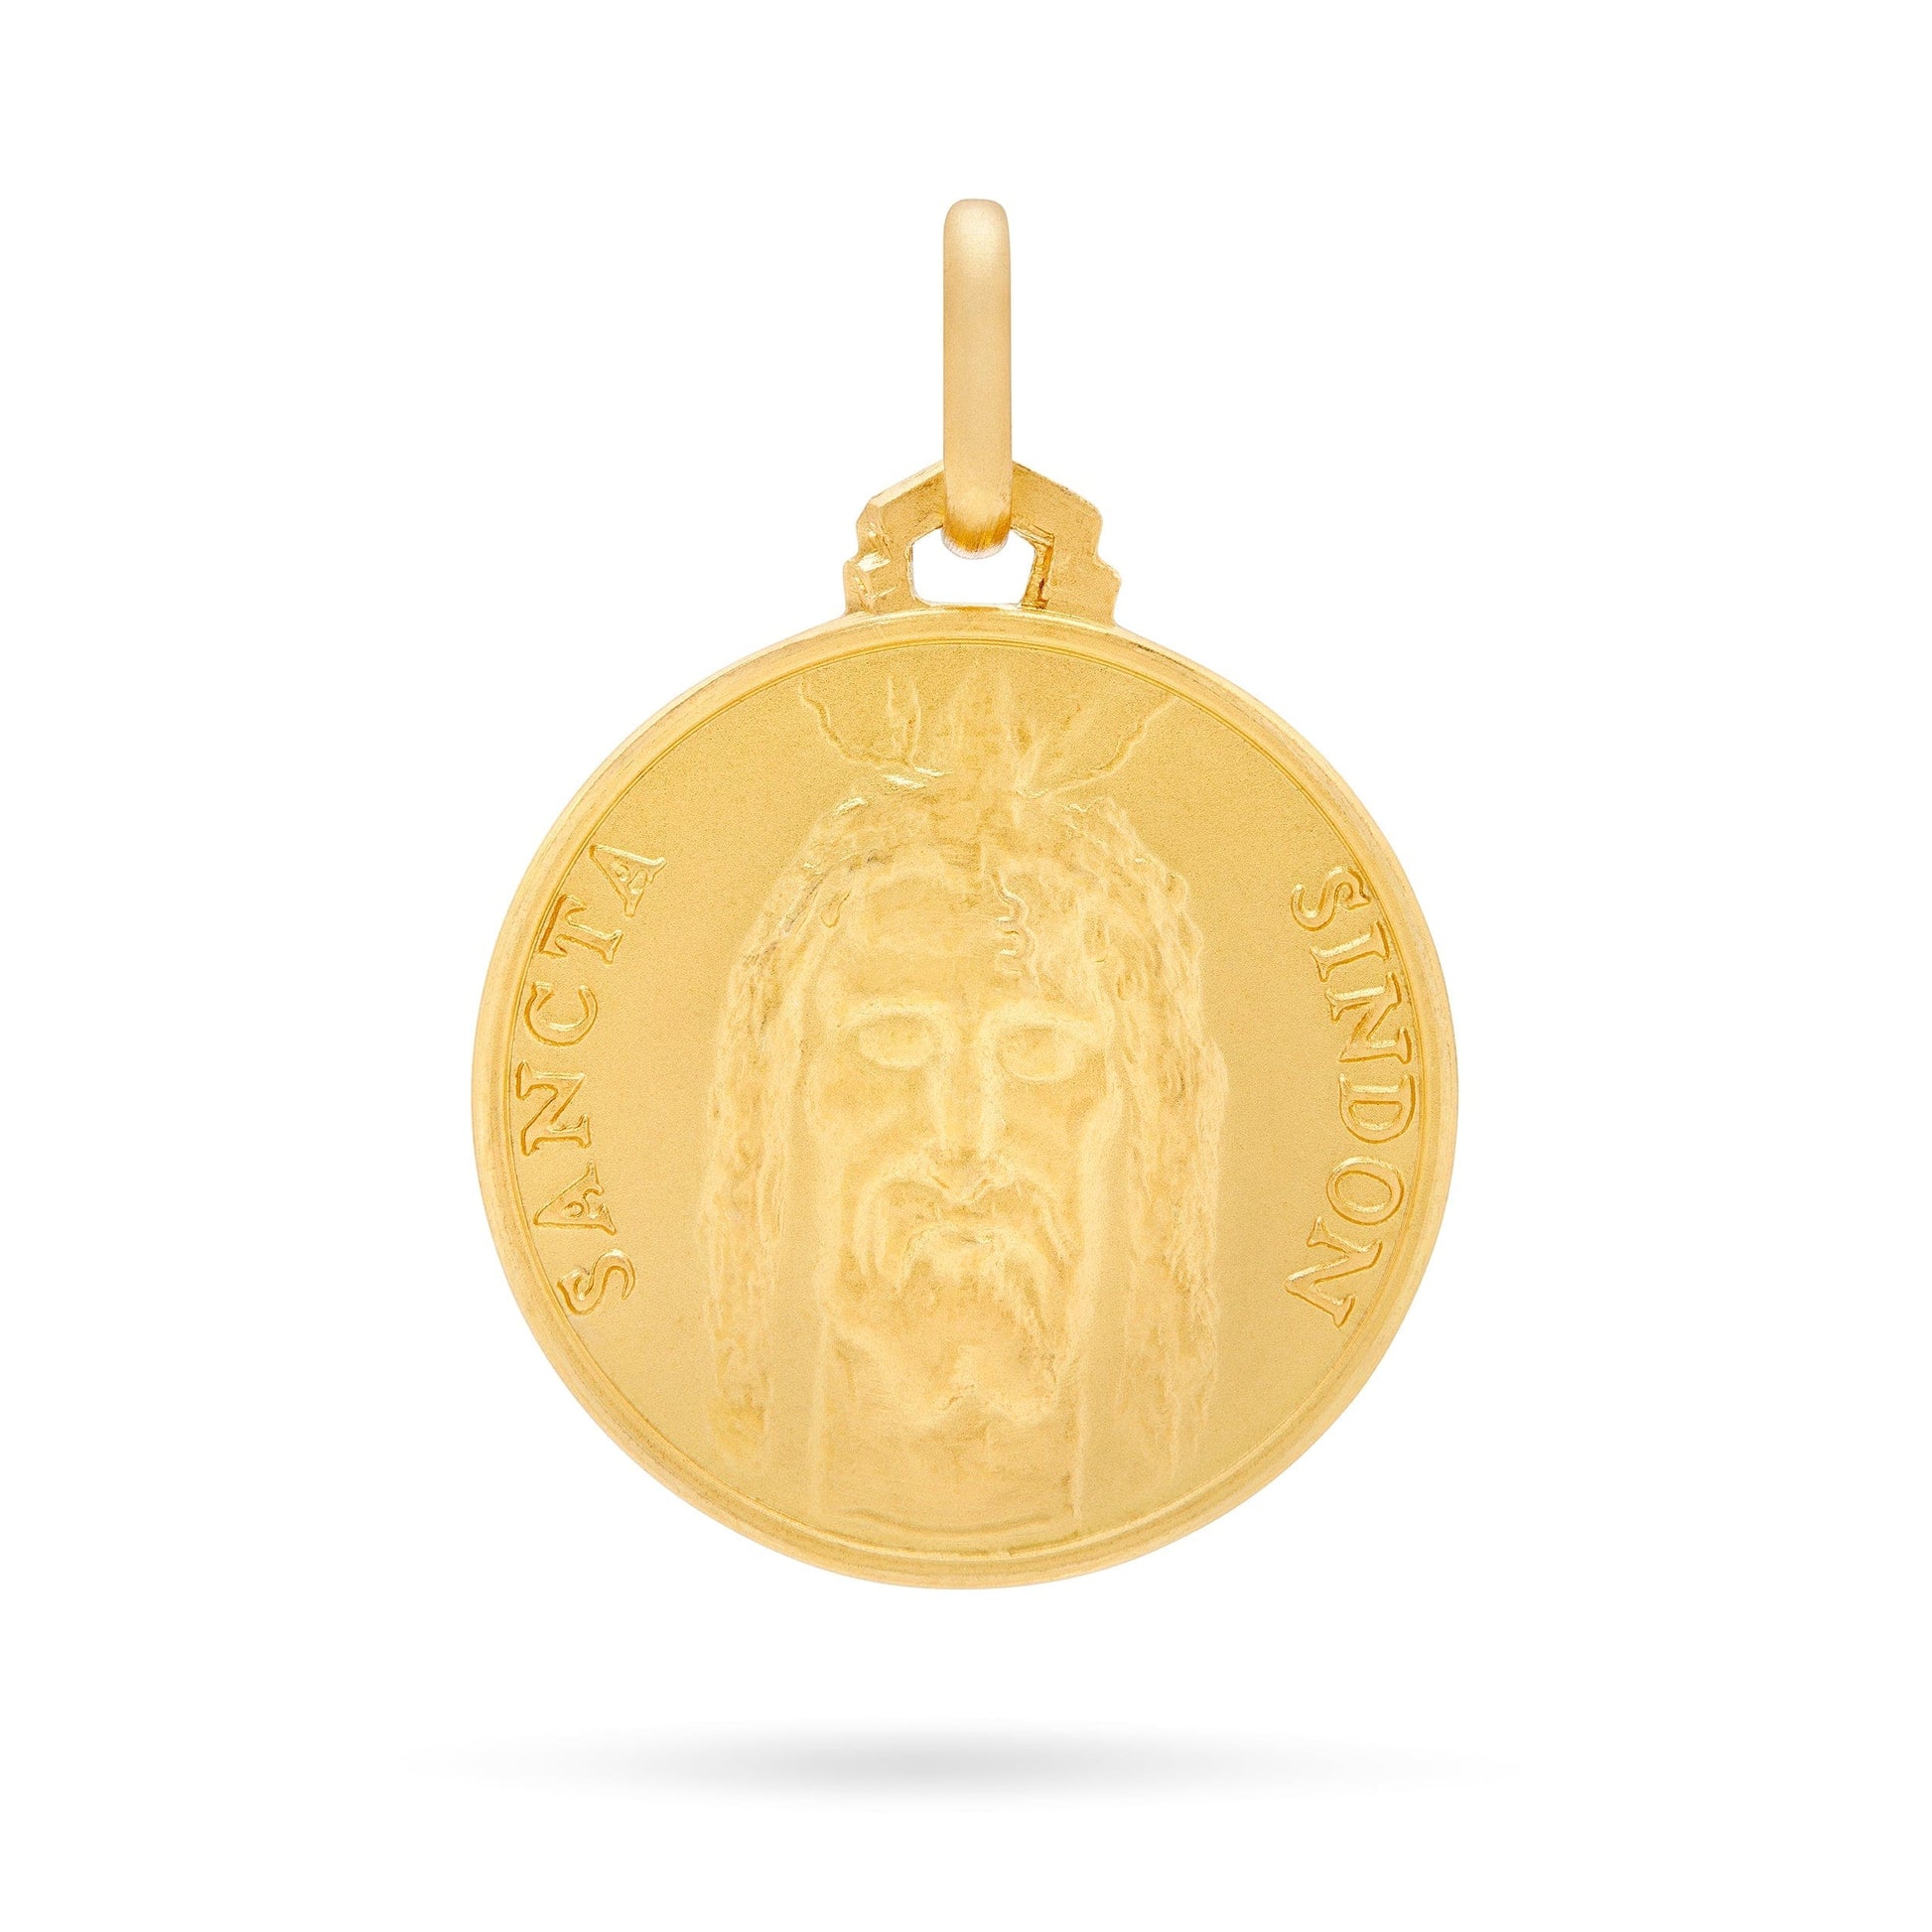 MONDO CATTOLICO Jewelry 14 mm (0.55 in) Gold medal of The Holy Shroud